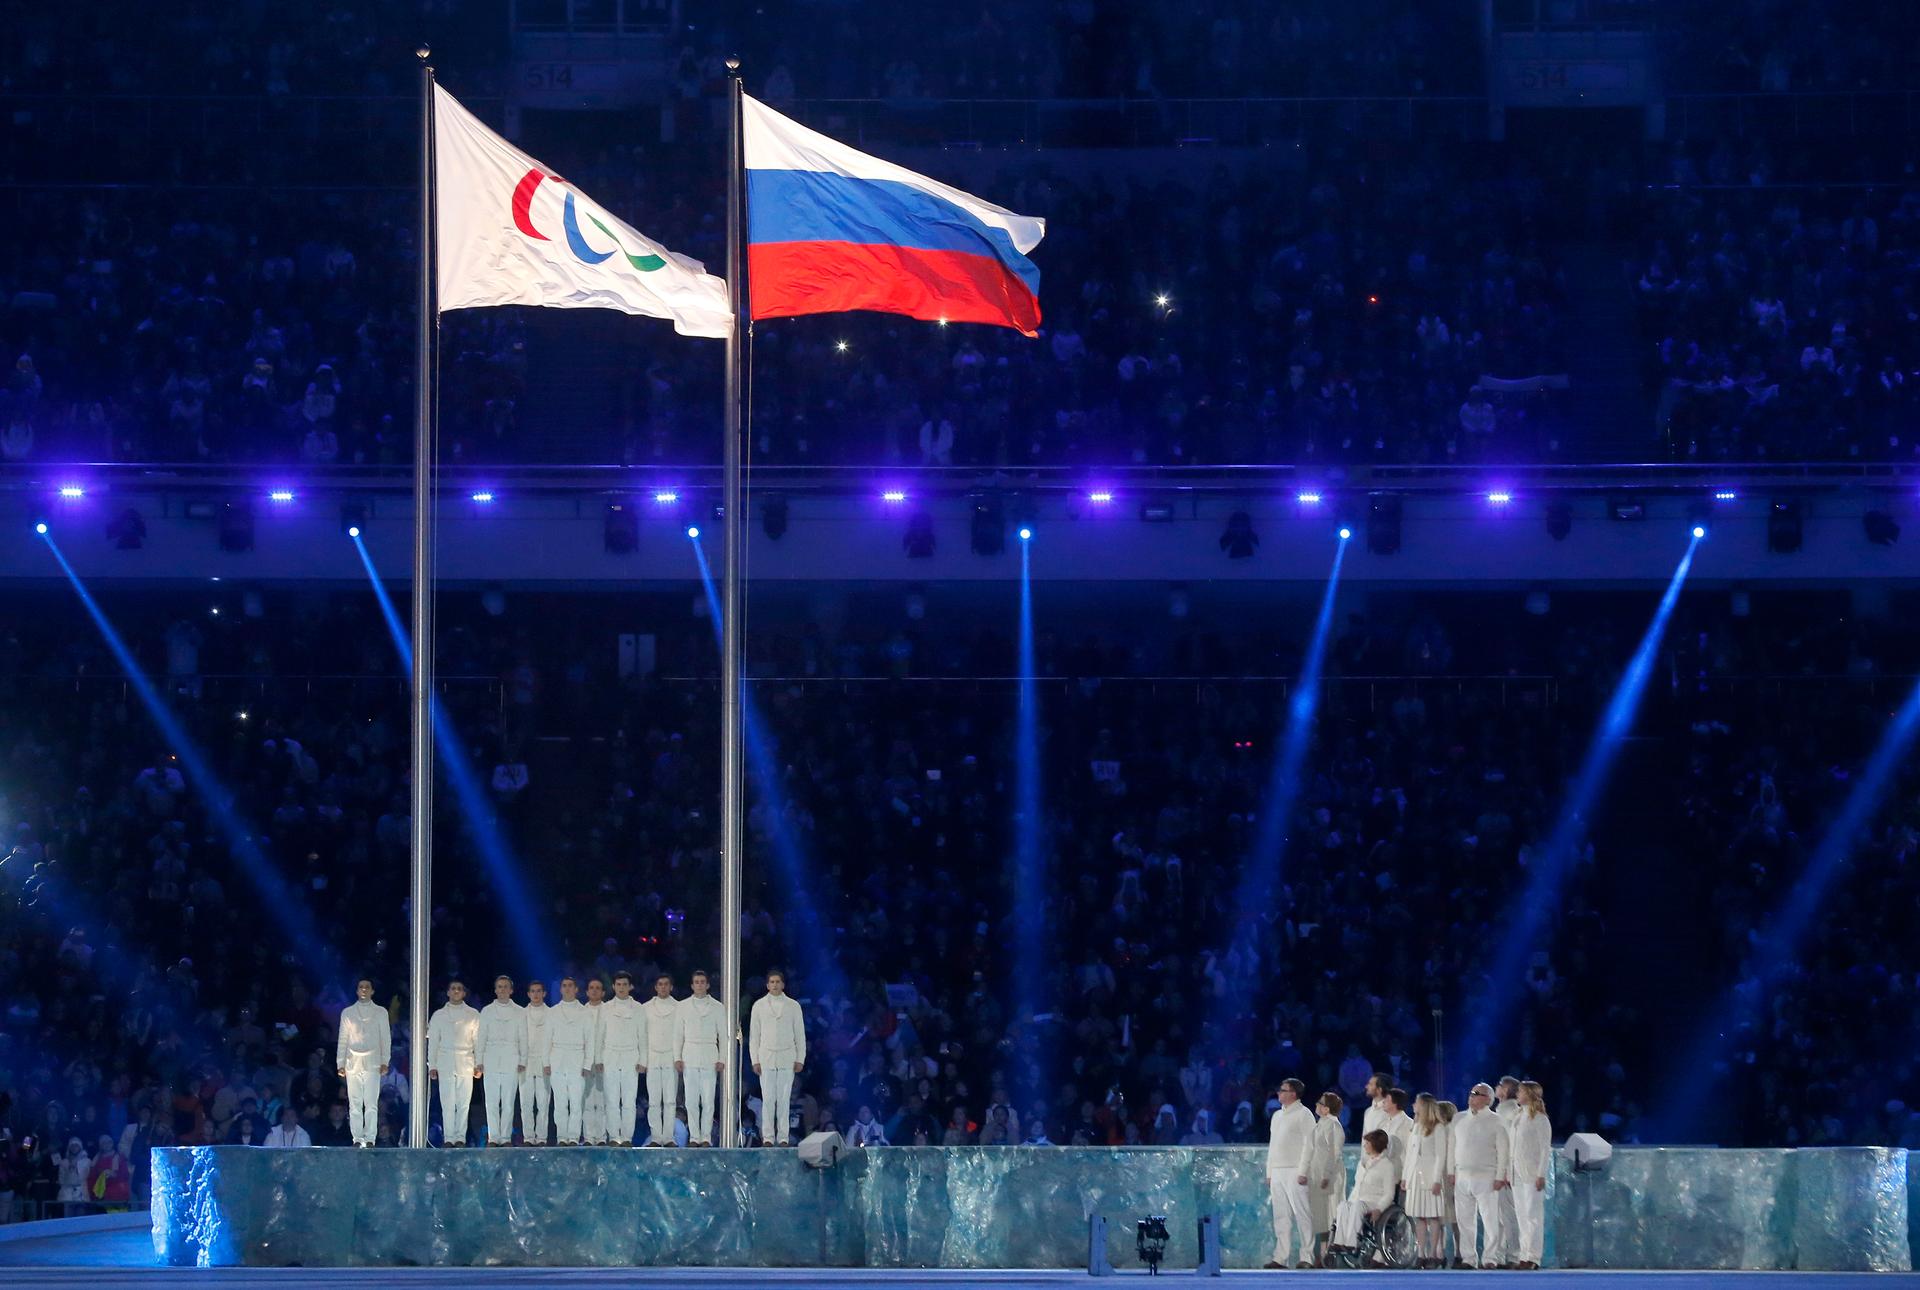 The Paralympic flag, left, is seen beside the Russian national flag during the opening ceremony of the 2014 Paralympic Winter Games in Sochi, March 7, 2014.